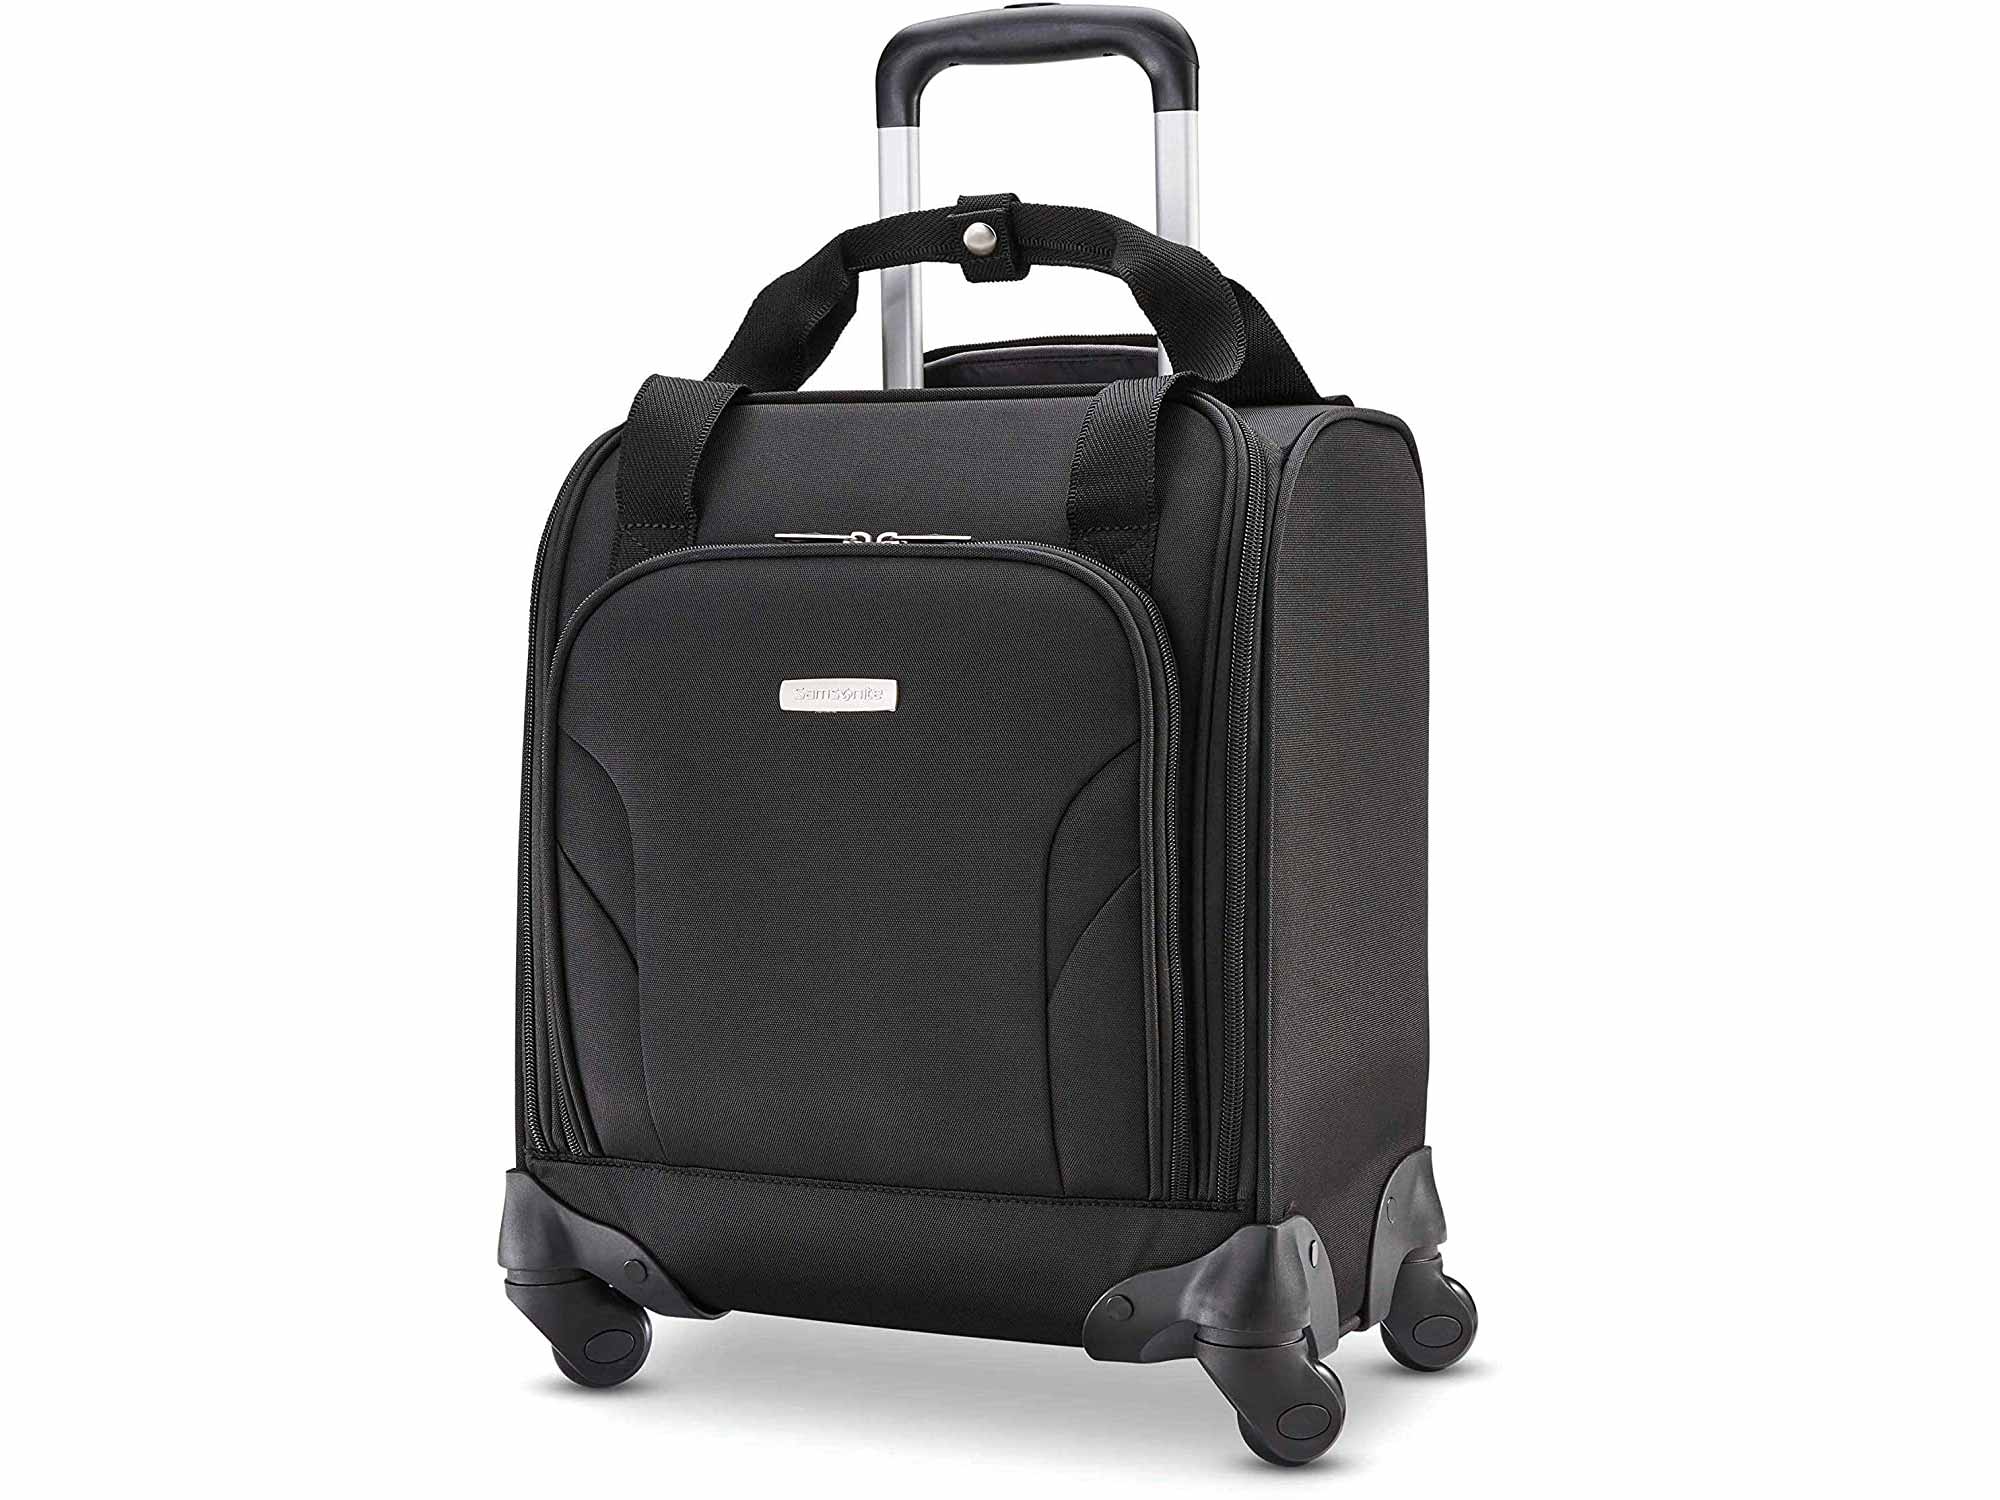 Samsonite Underseat Carry-On Spinner With USB Port, Jet Black, One Size